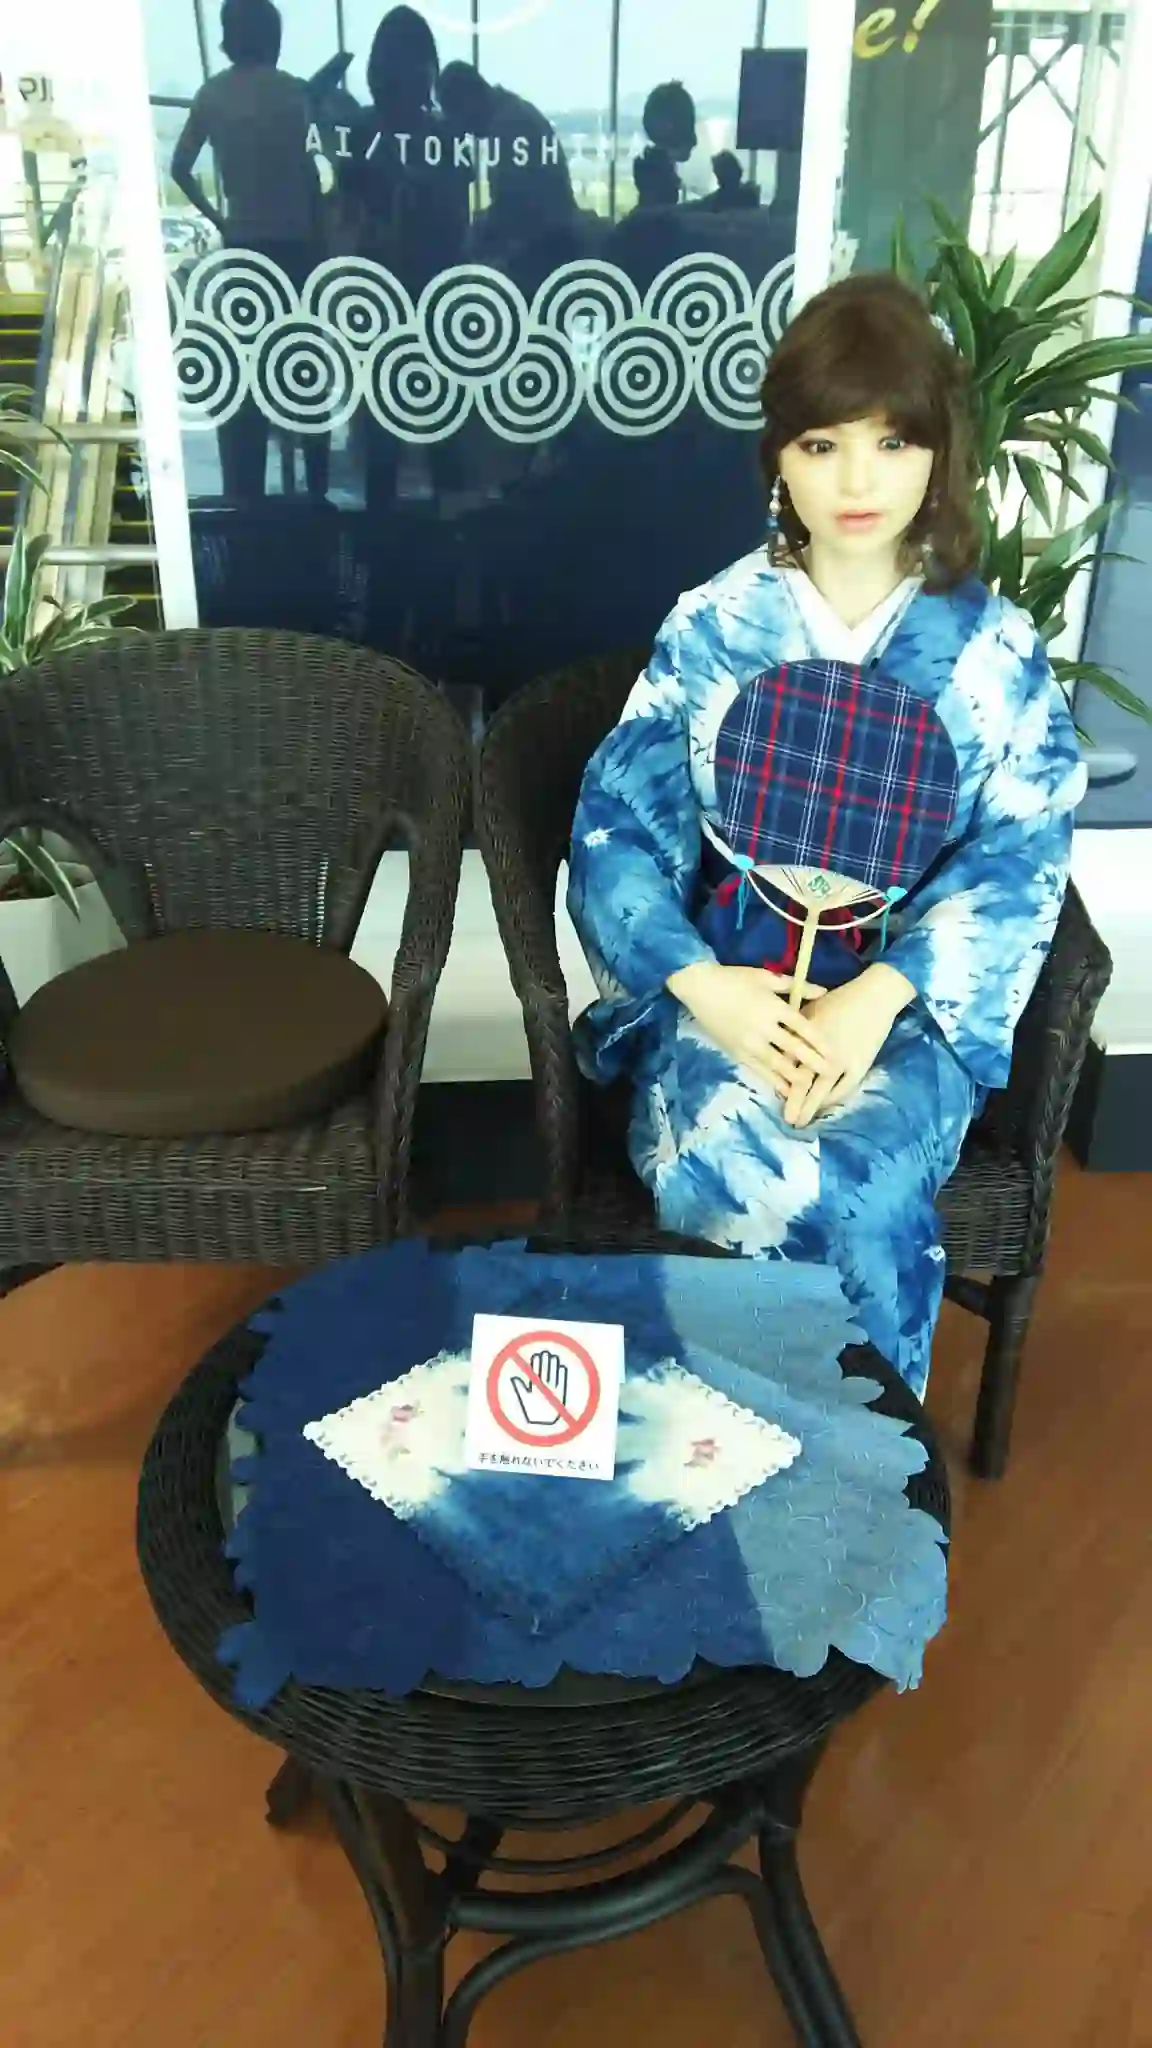 H dolls were used in an official Japanese government event